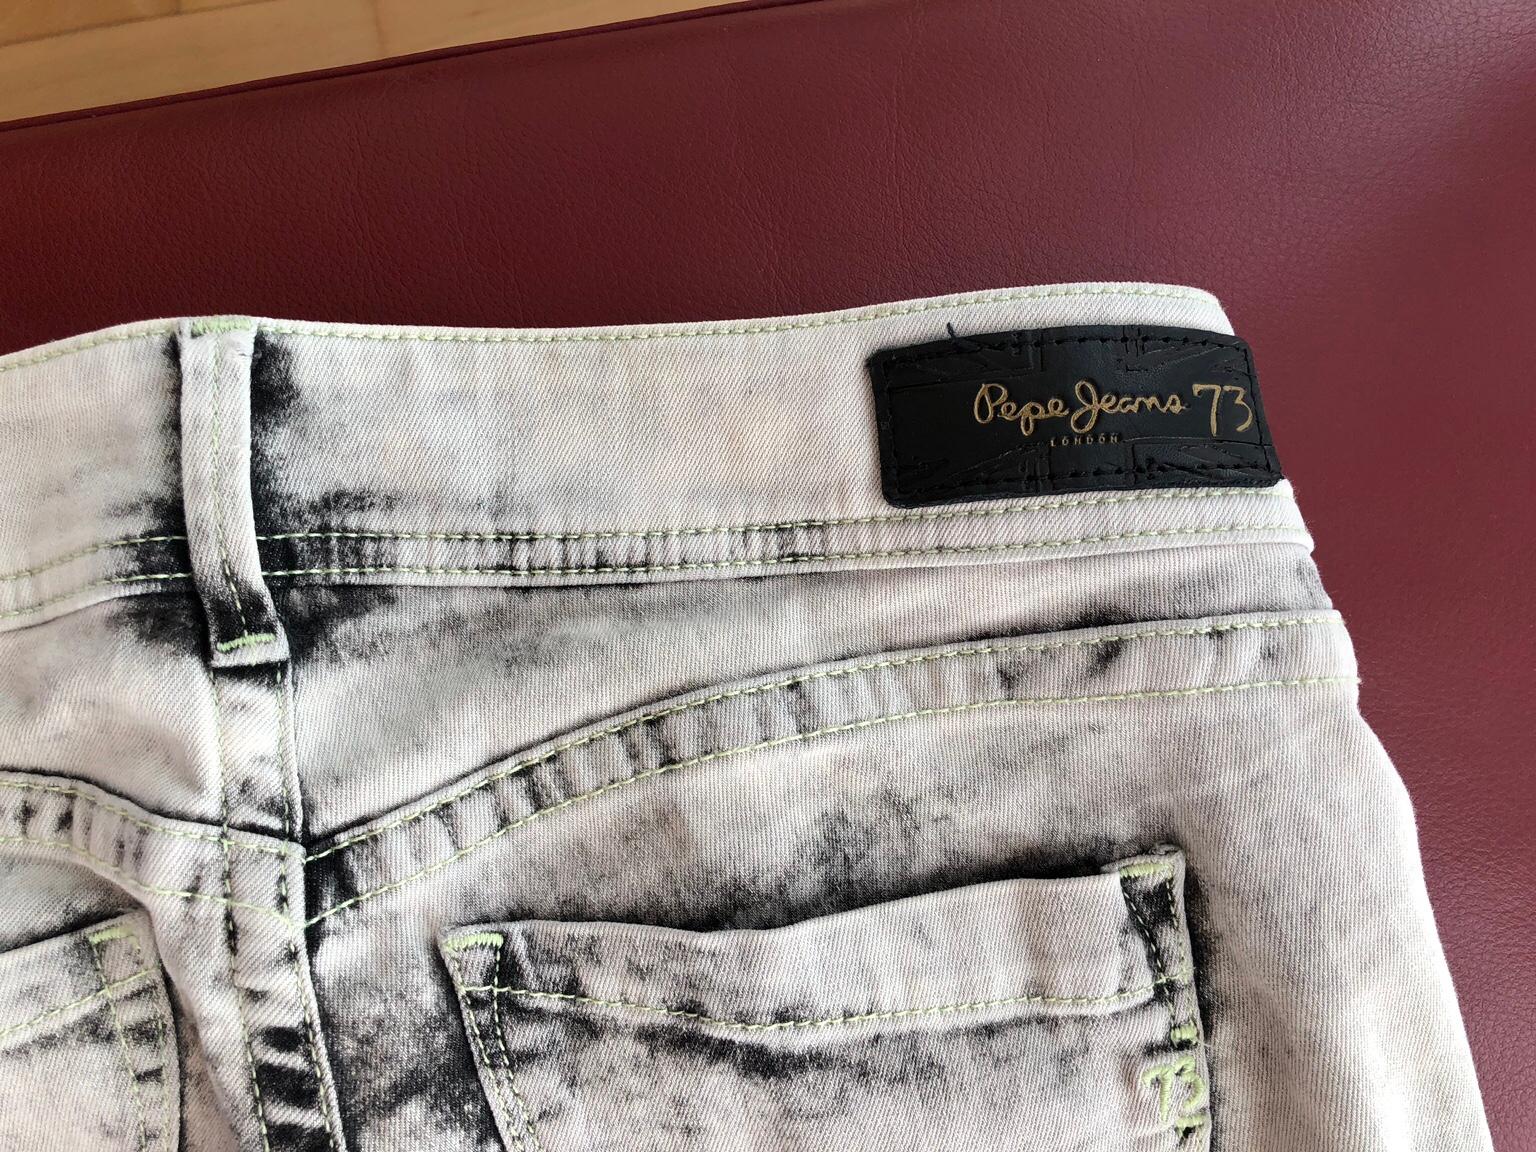 Neue Pepe Jeans Hose Strech In 1010 Vienna For 30 00 For Sale Shpock